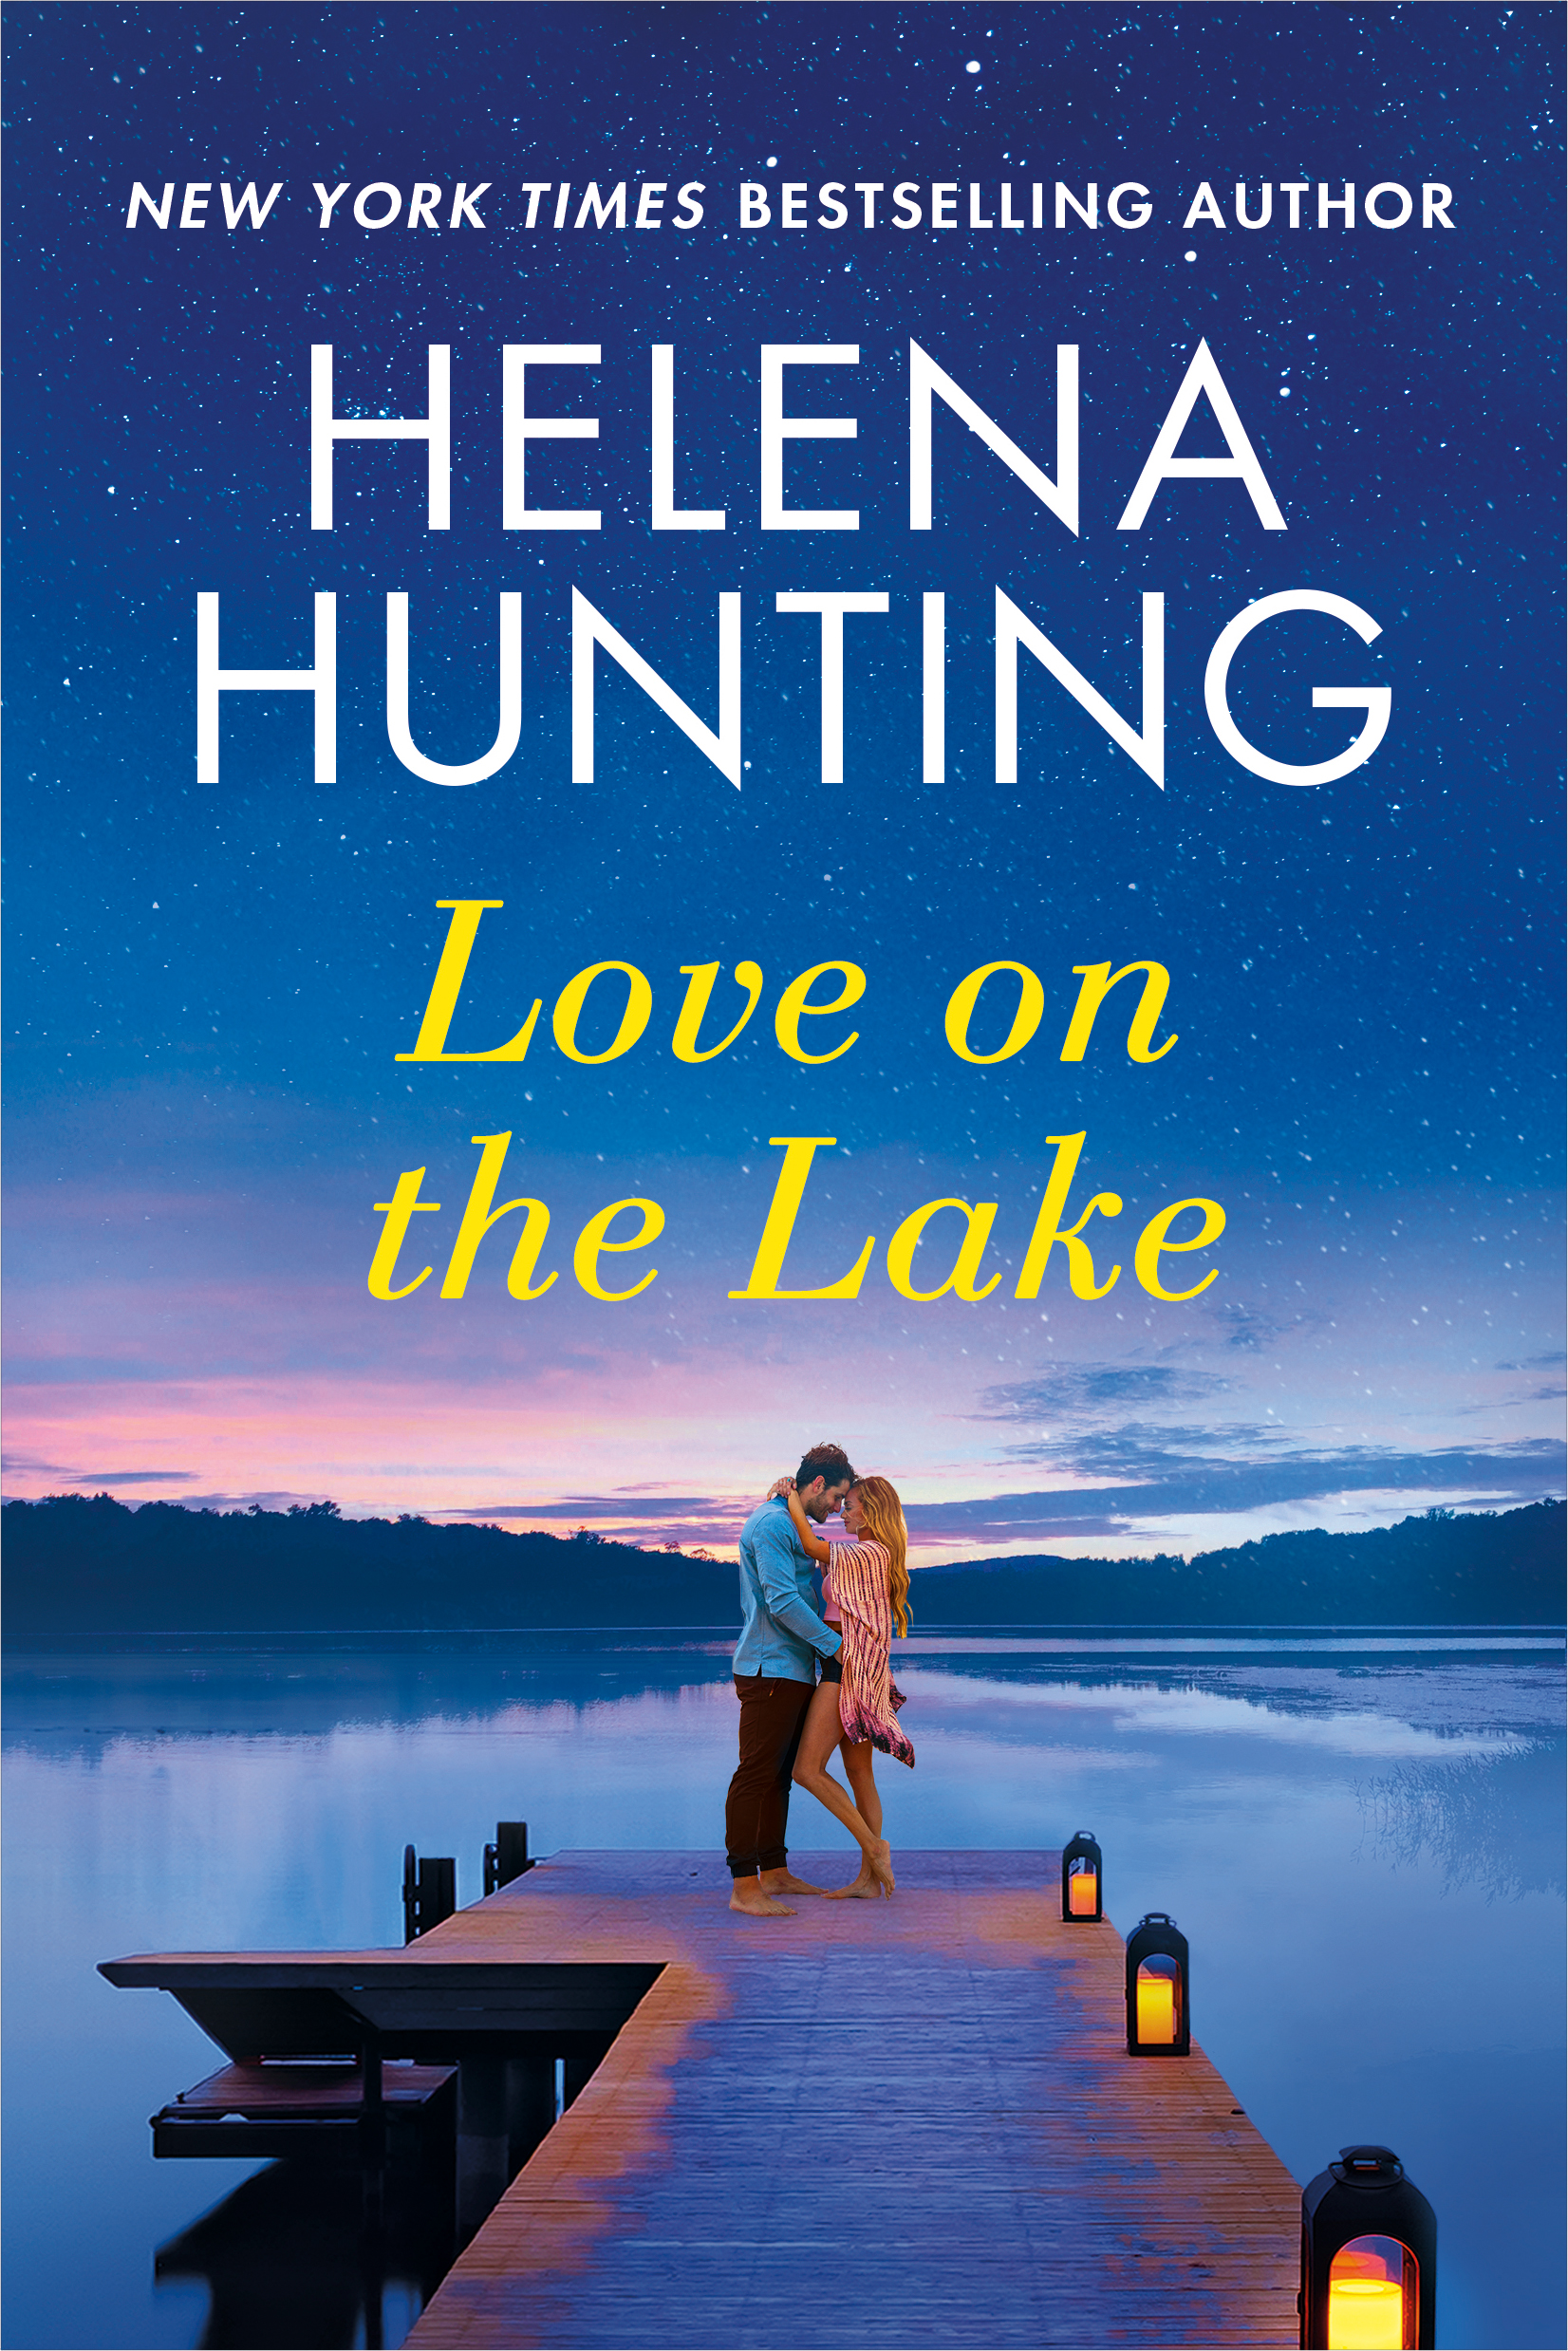 Hunting_Love on the Lake_29935_FT